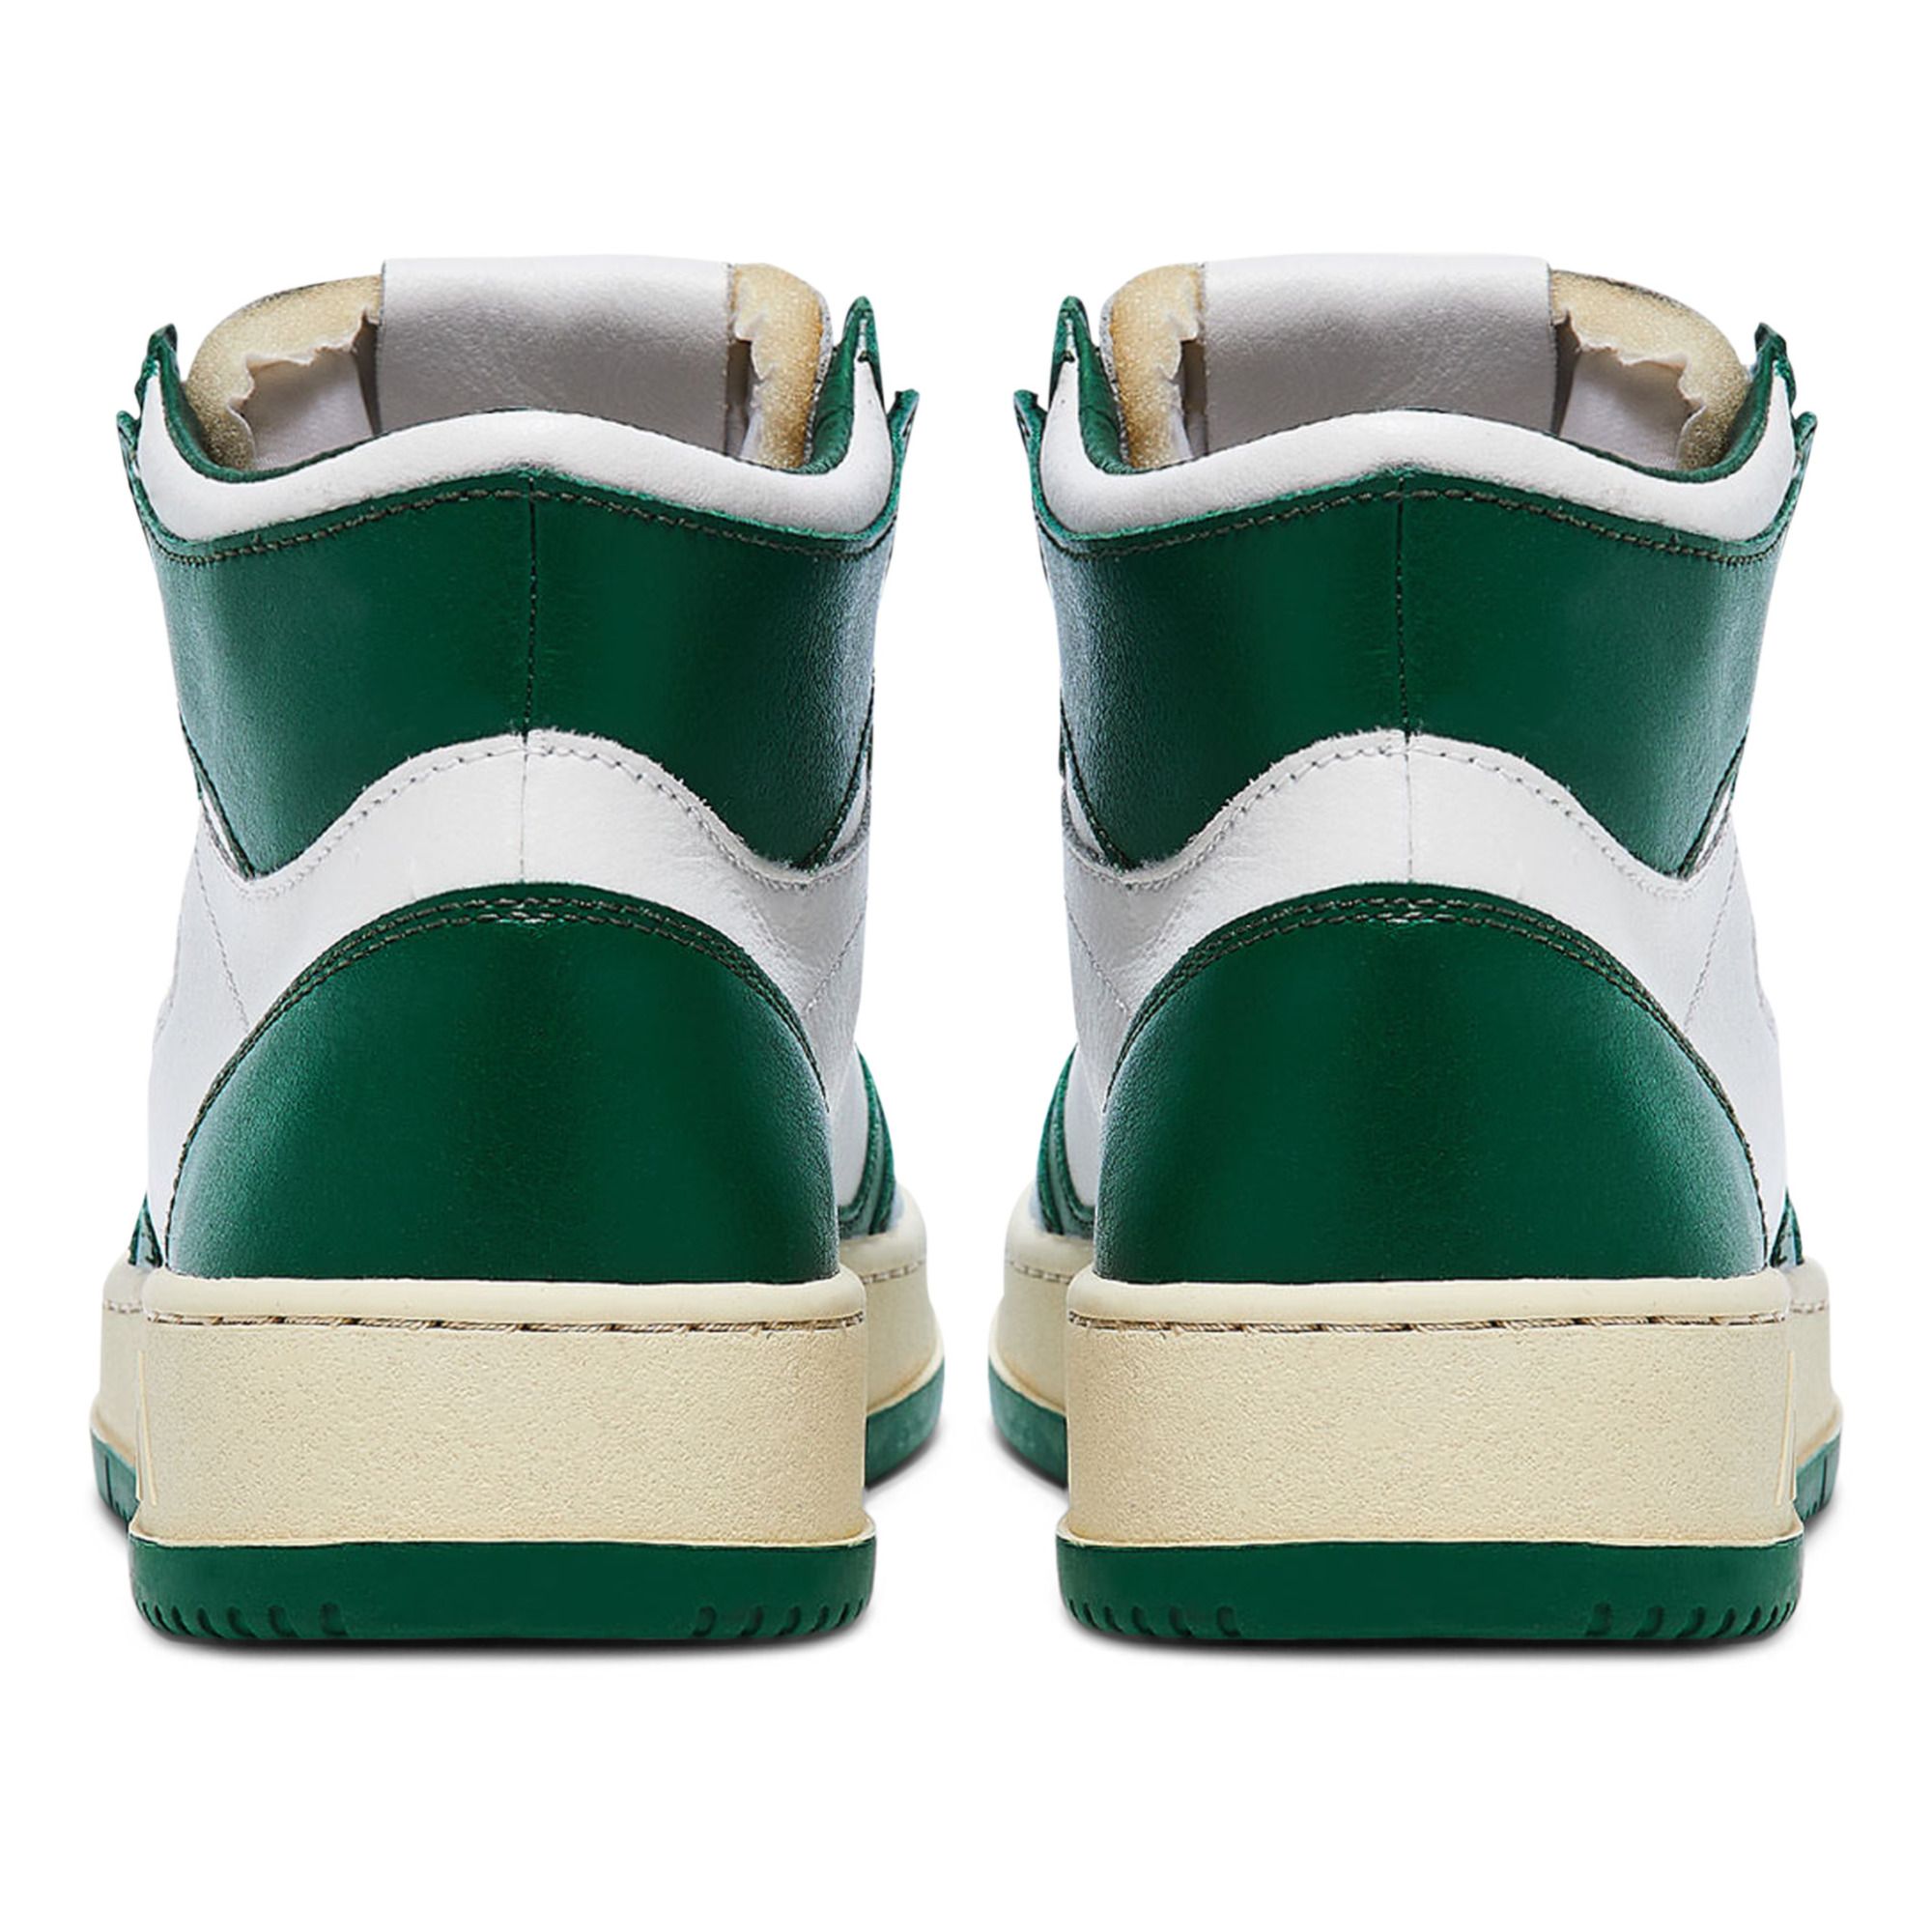 Autry Green & White Medalist Mid Sneakers